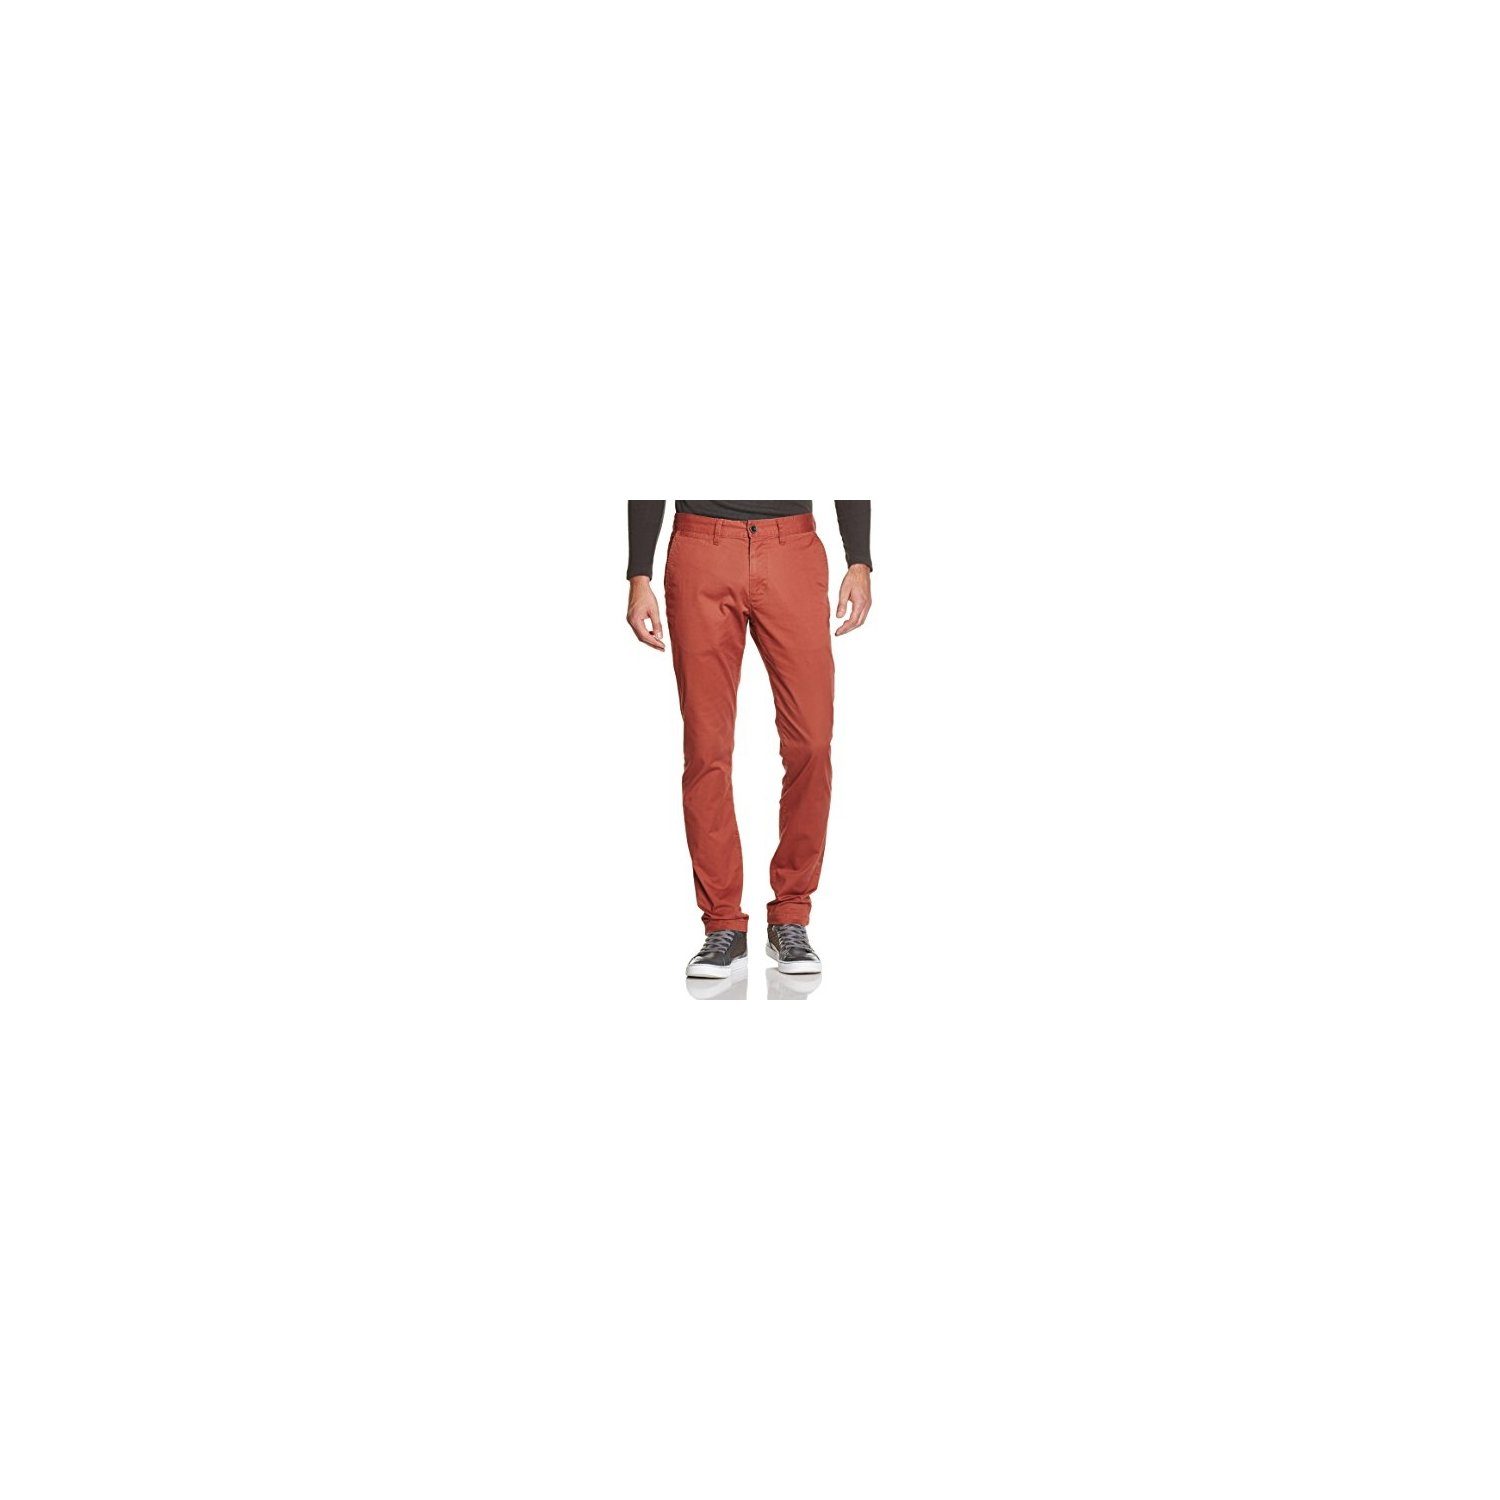 CQN0 Quiksilver Homewearhose PANT CLAY BAKED - / S KRANDY